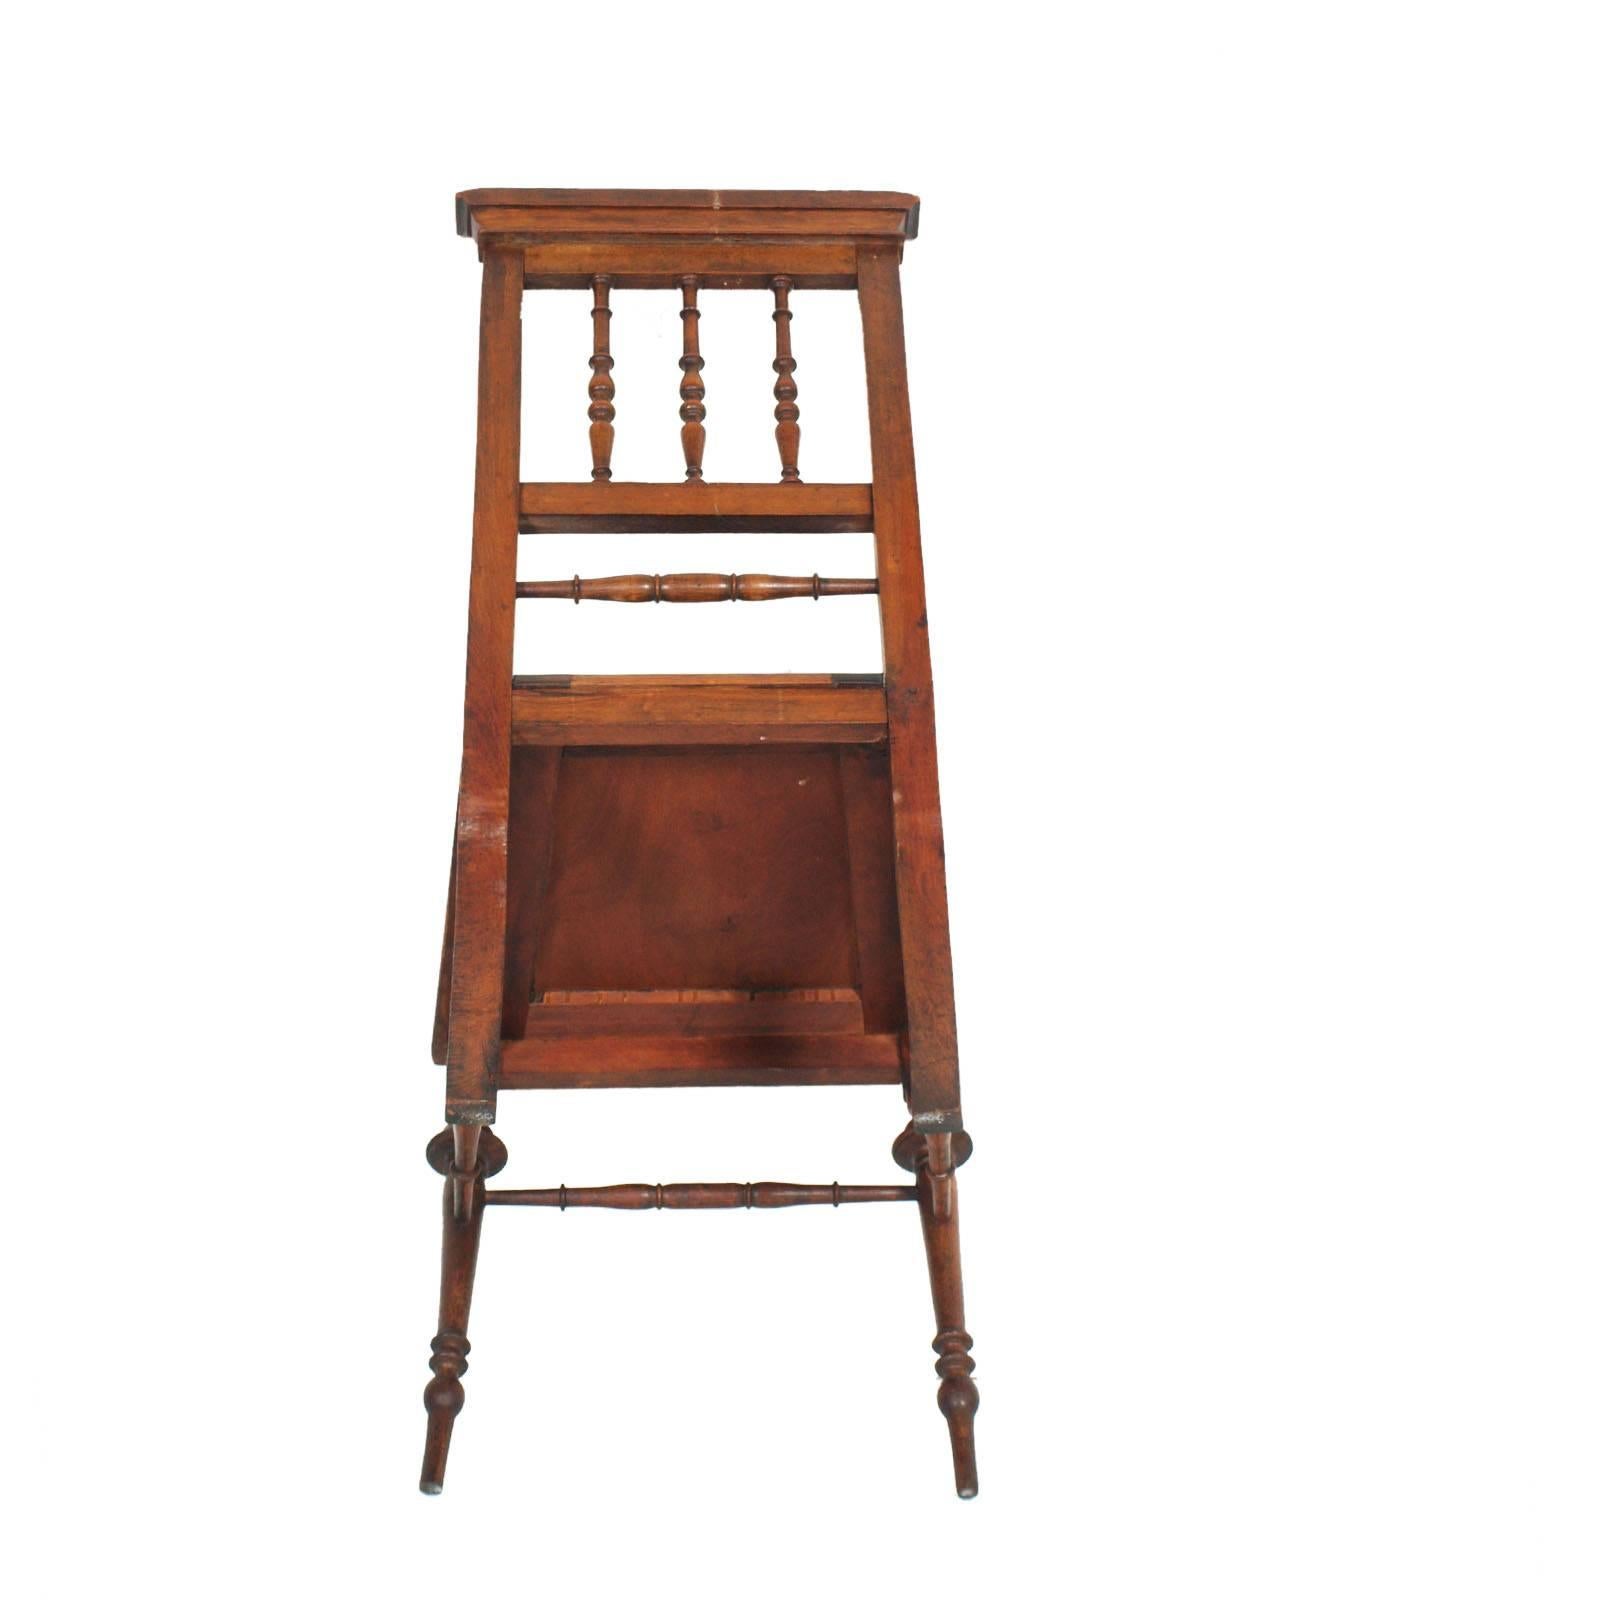 19th Century Chiavarine Chairs Turned Walnut with Hand-Carved Seat In Good Condition For Sale In Vigonza, Padua